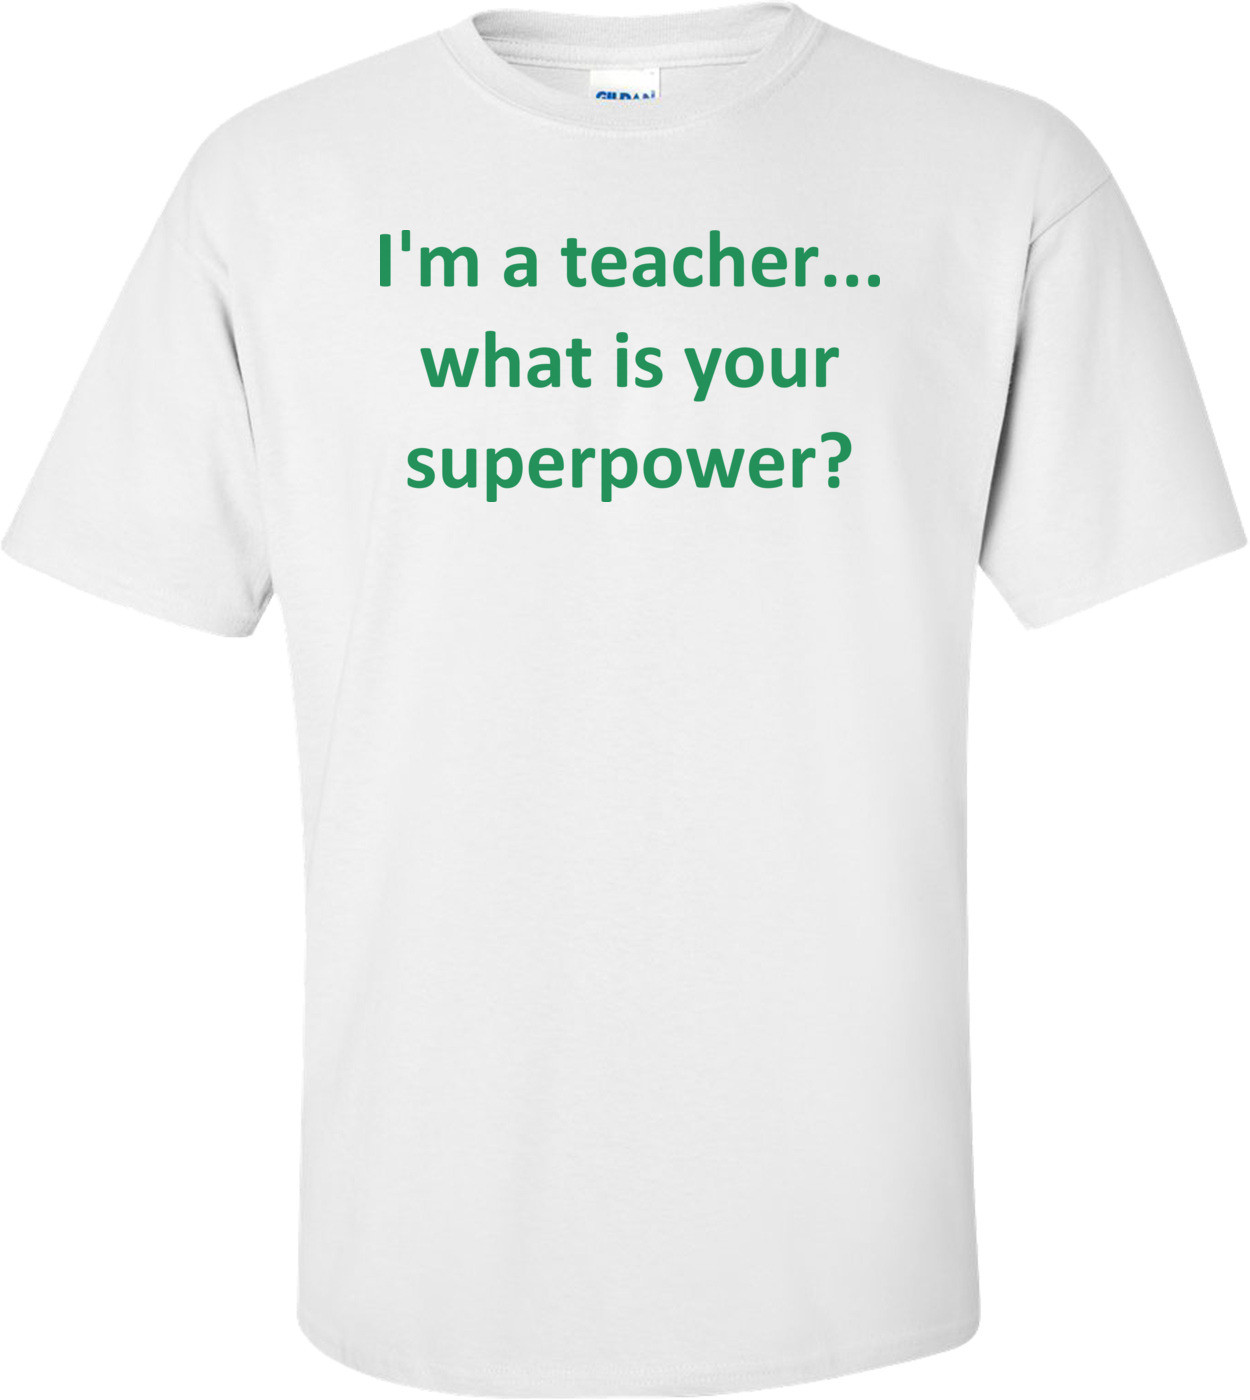 I'm A Teacher... What Is Your Superpower? Shirt